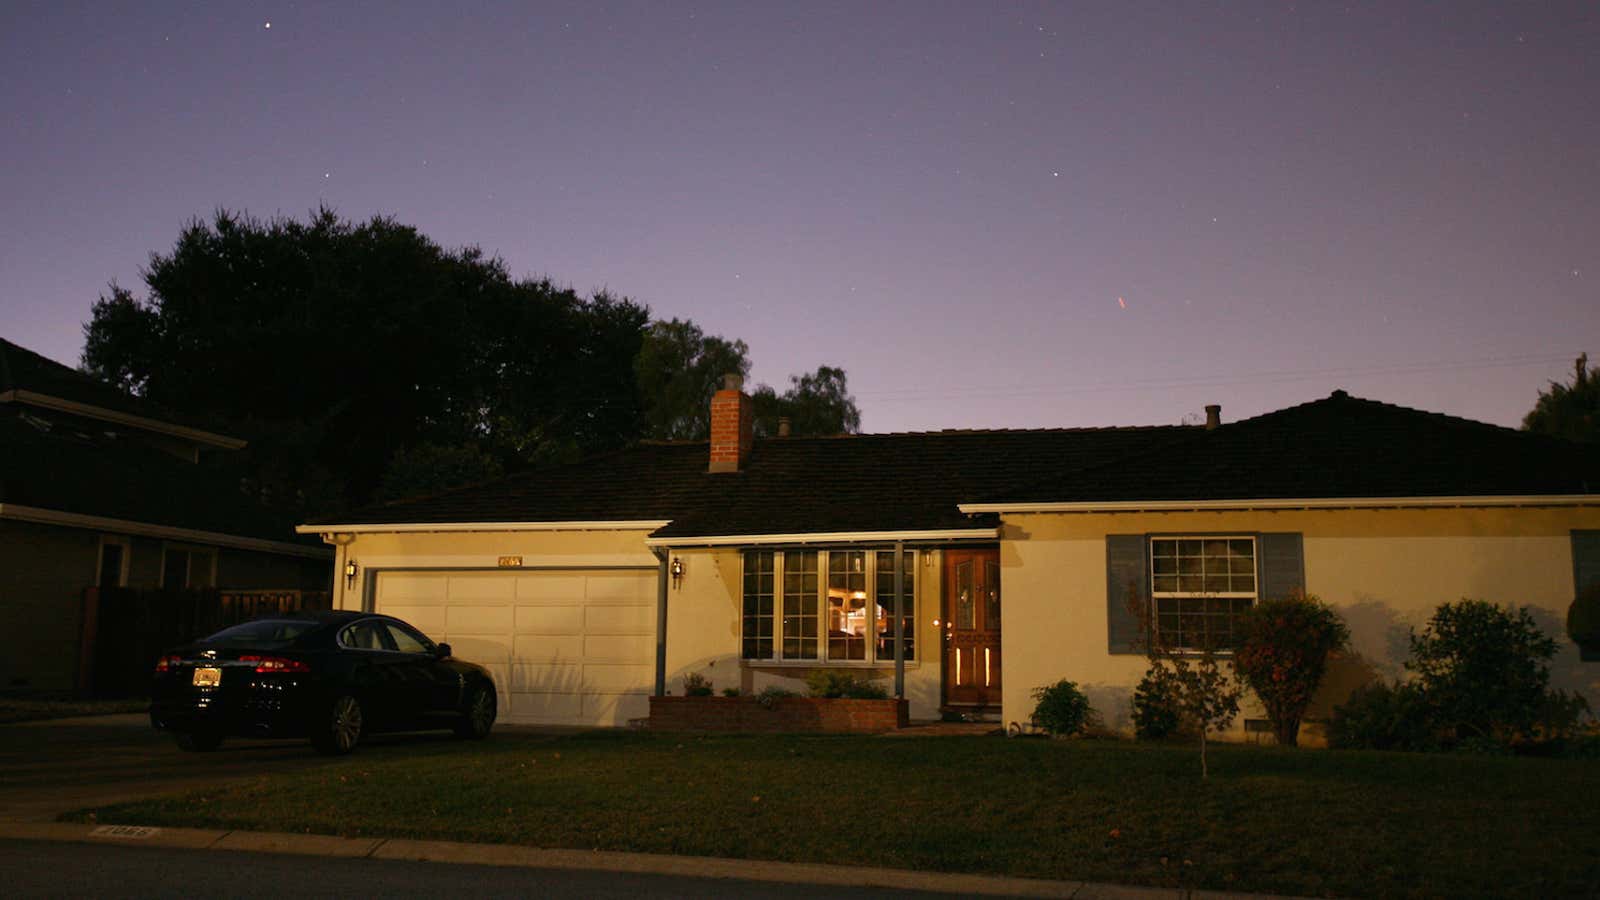 Humble beginnings of an empire:  The home and garage where Steve Jobs founded Apple.